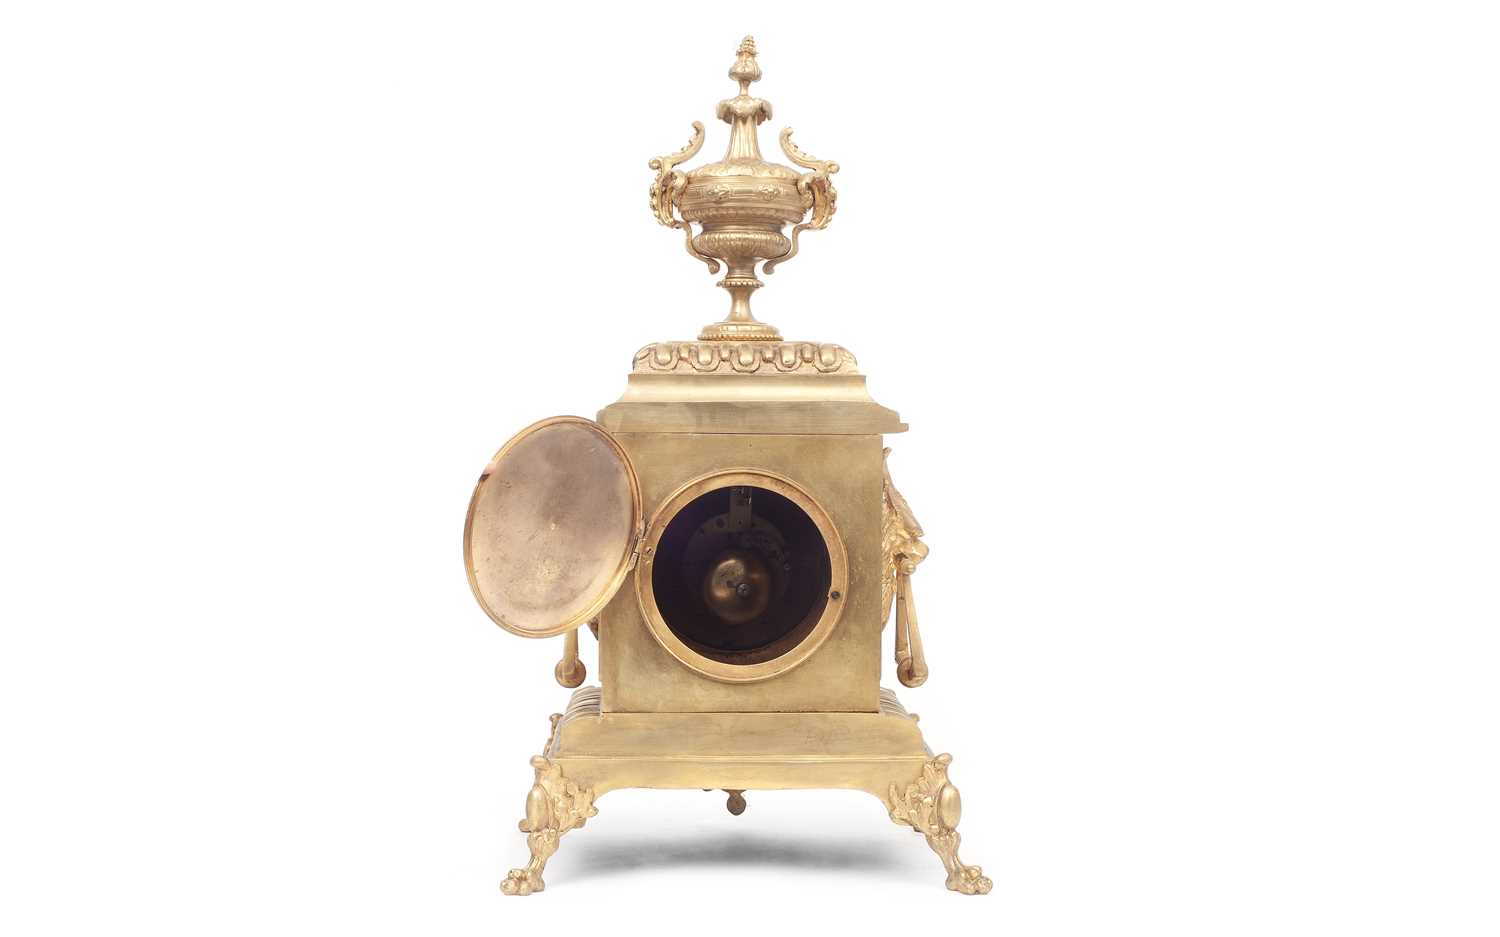 A LARGE LATE 19TH CENTURY FRENCH GILT BRONZE MANTEL CLOCK - Image 2 of 3